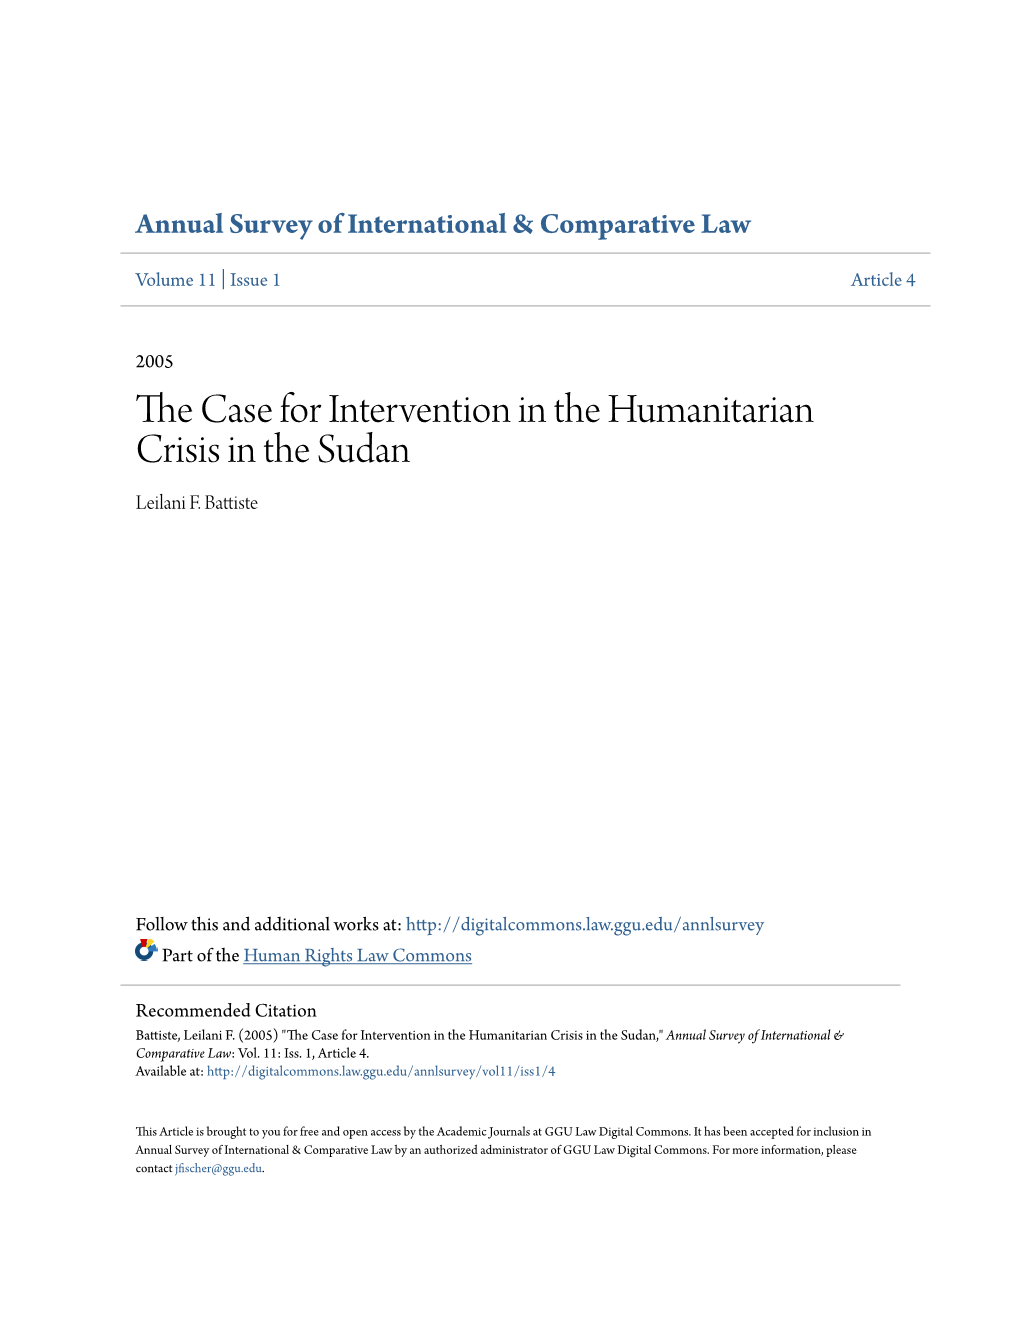 The Case for Intervention in the Humanitarian Crisis in the Sudan